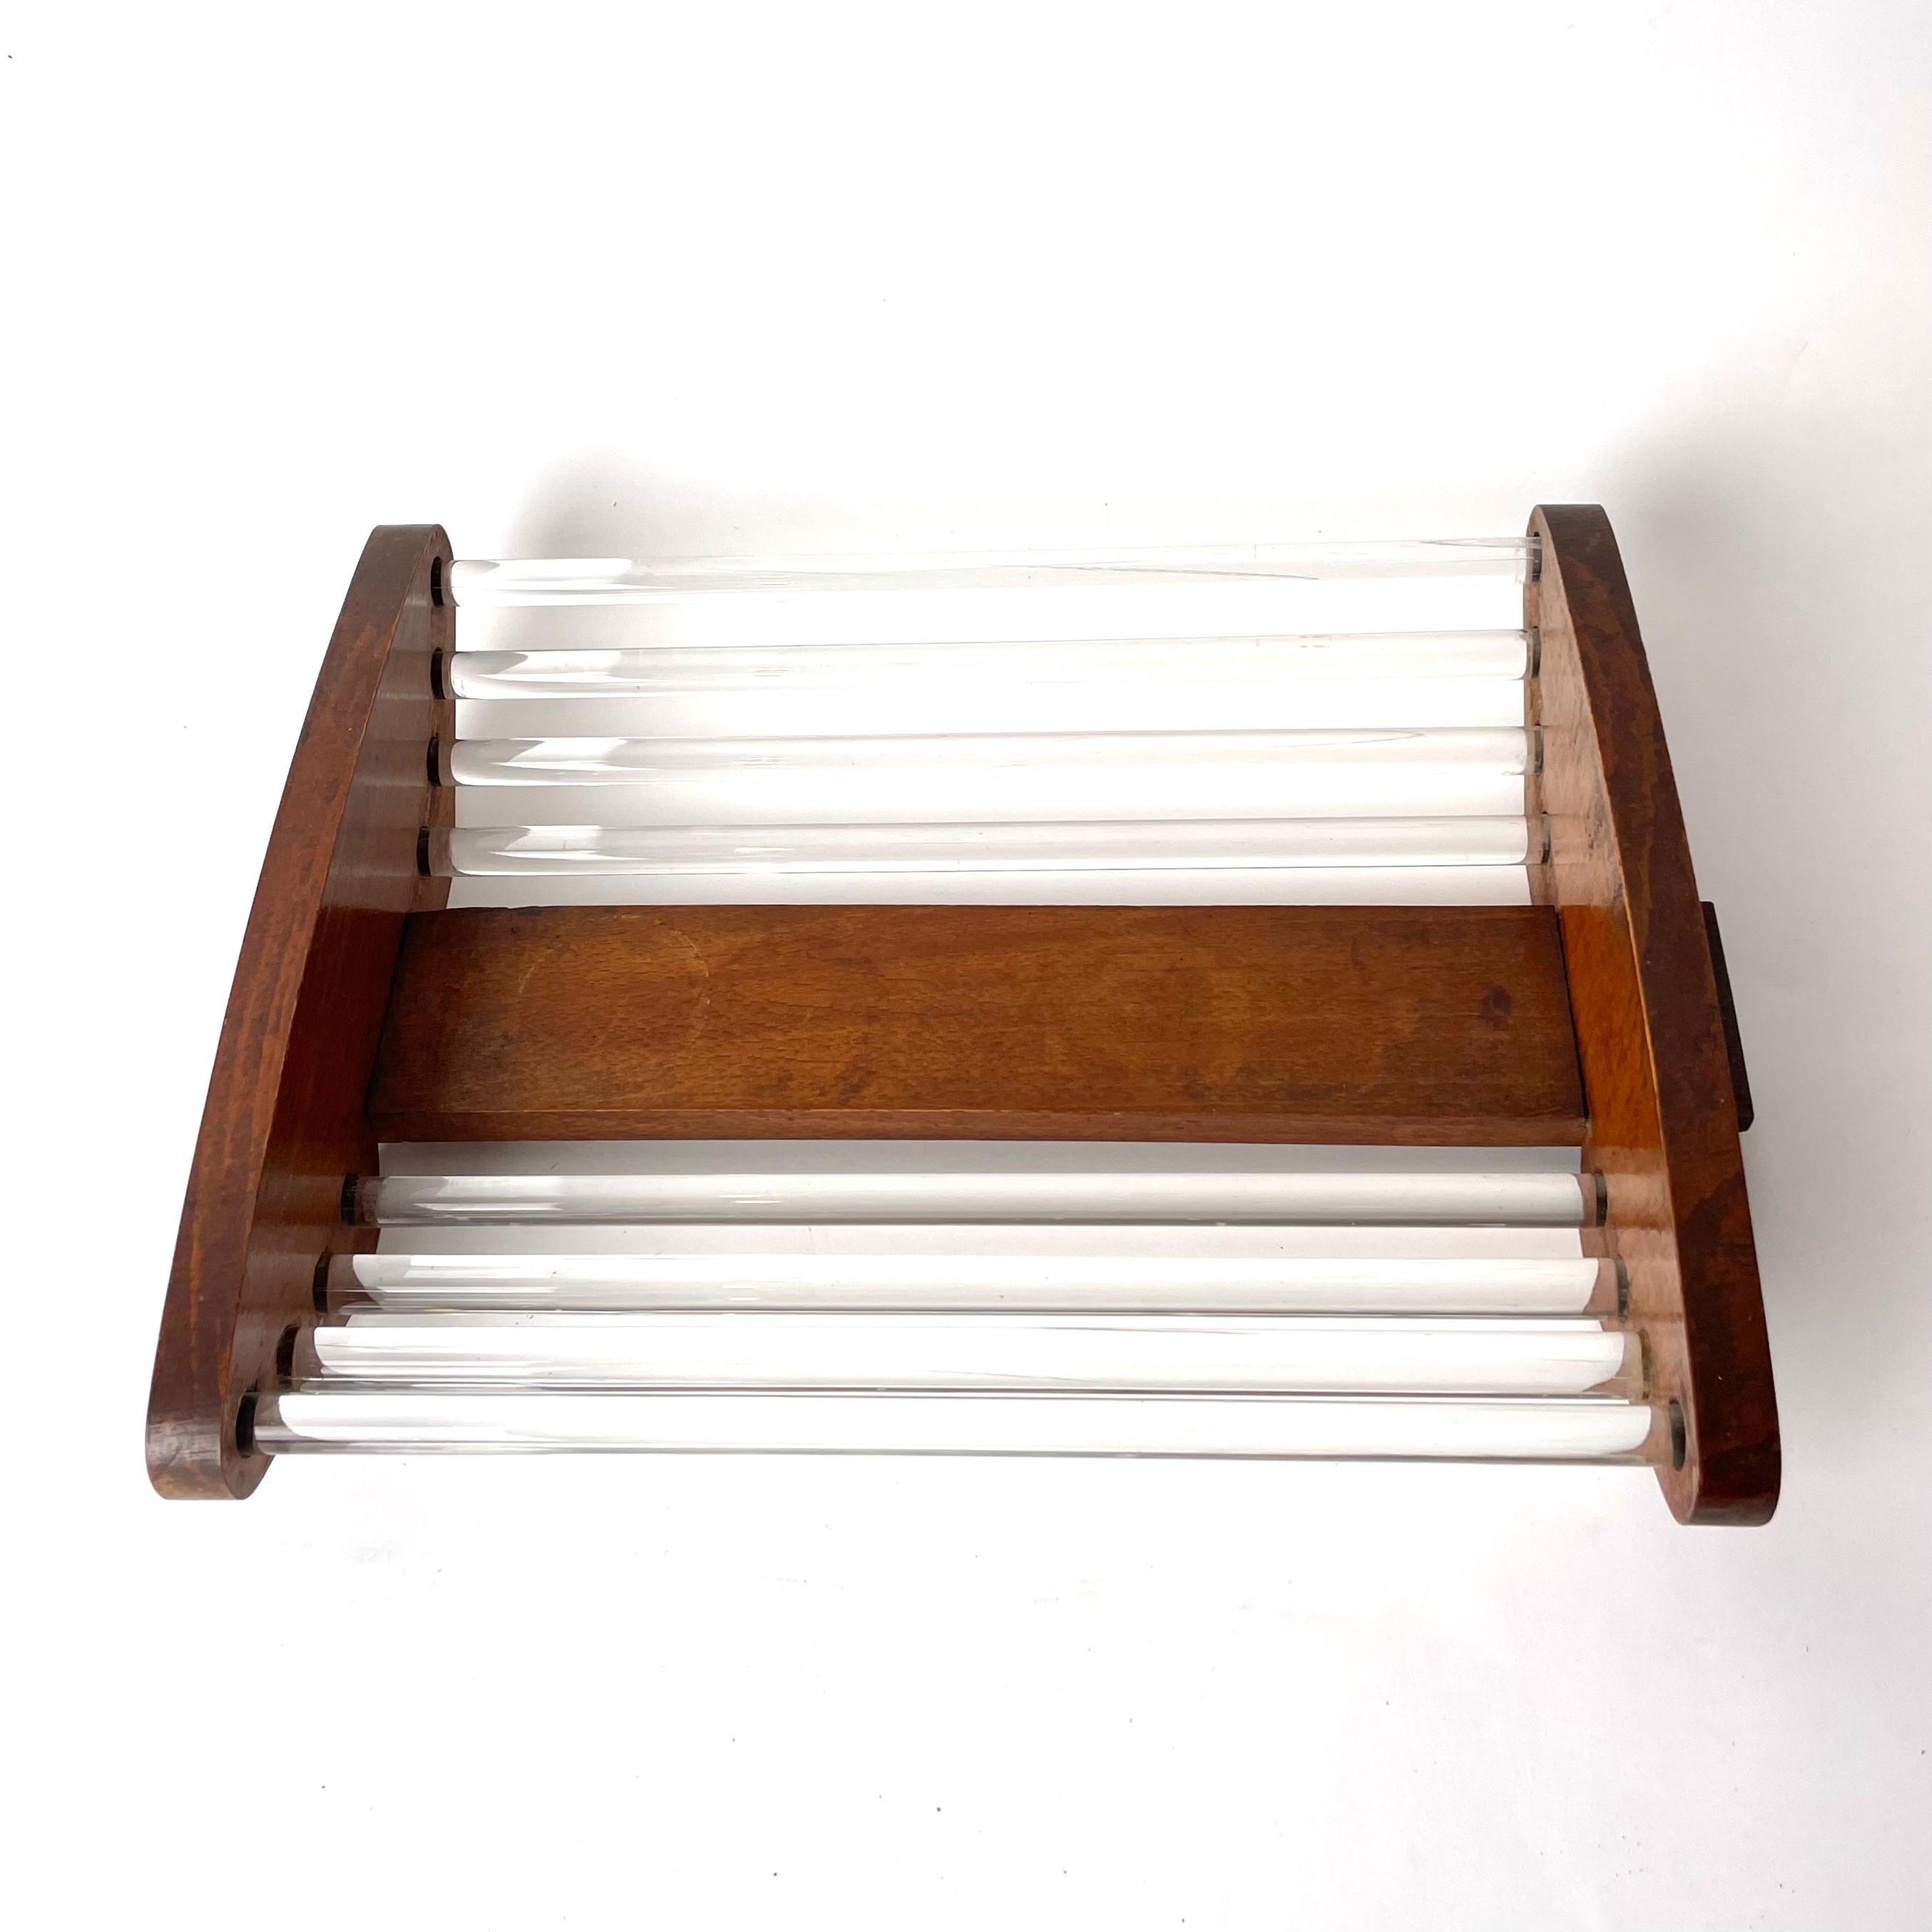 French Art Deco Fruit Platter, Beech Wood with Glass Rods, 1920s In Good Condition For Sale In Knivsta, SE